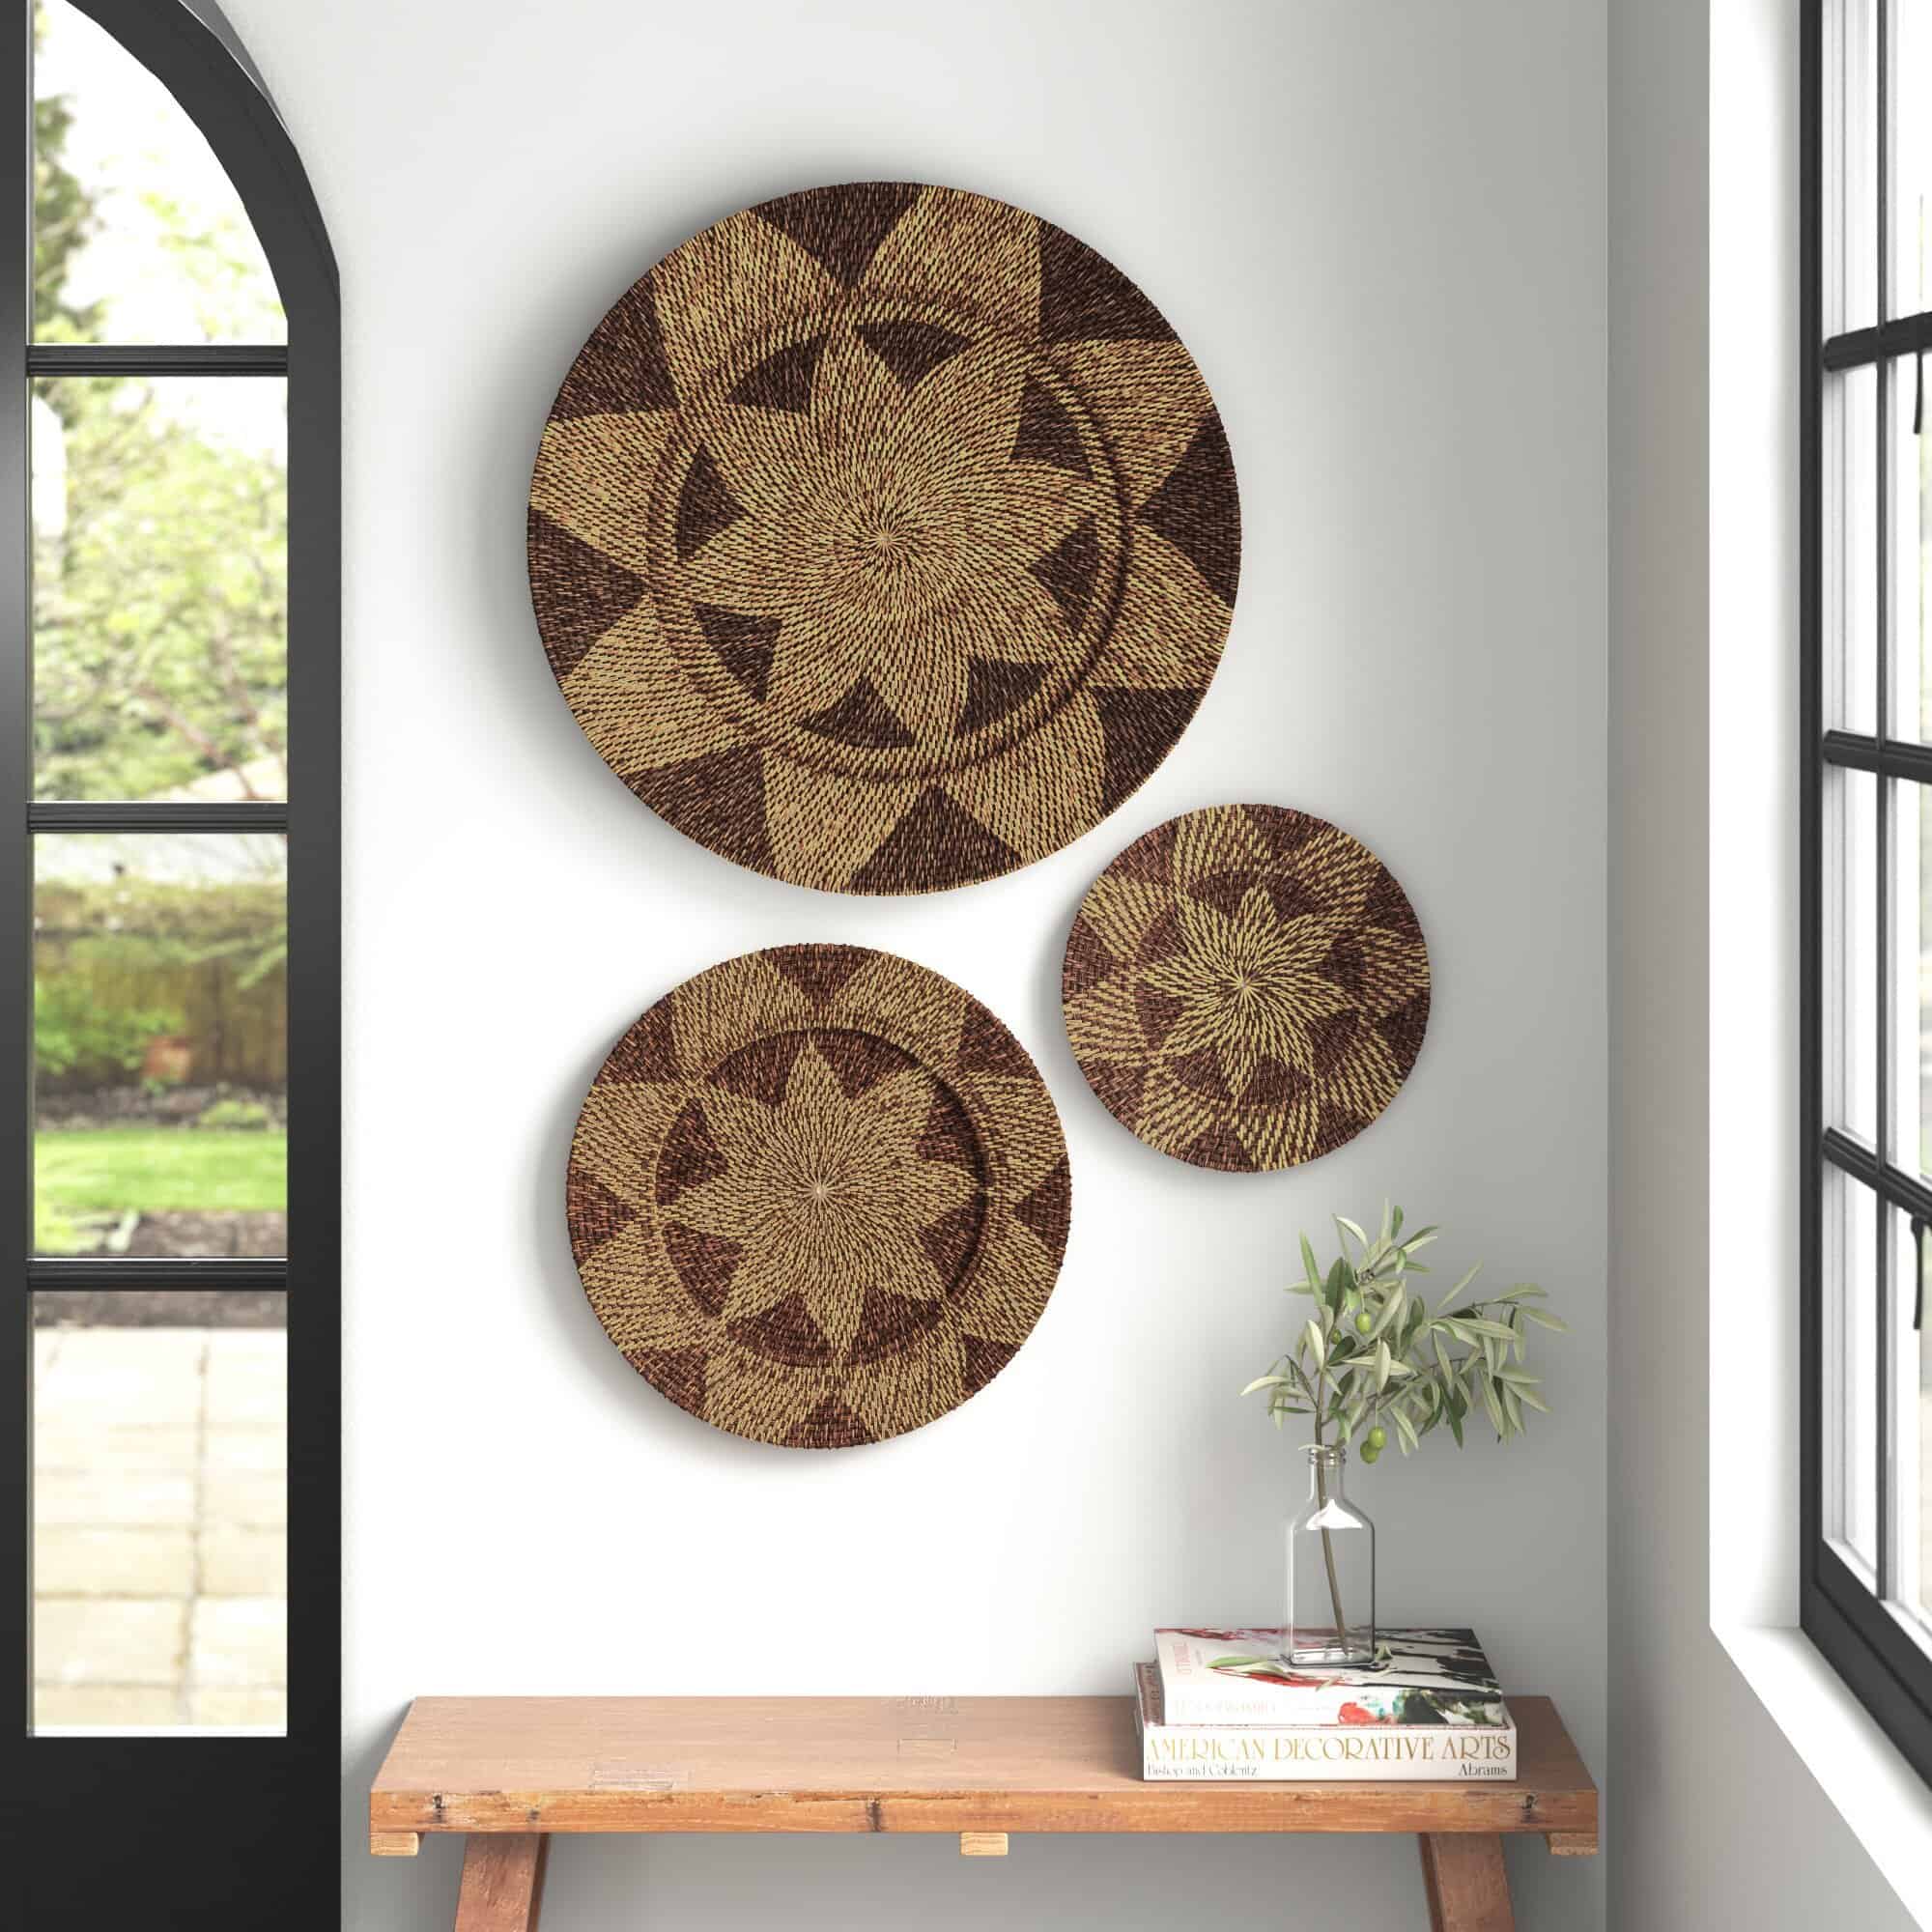 Create Texture And Charm on Your Wall With Baskets